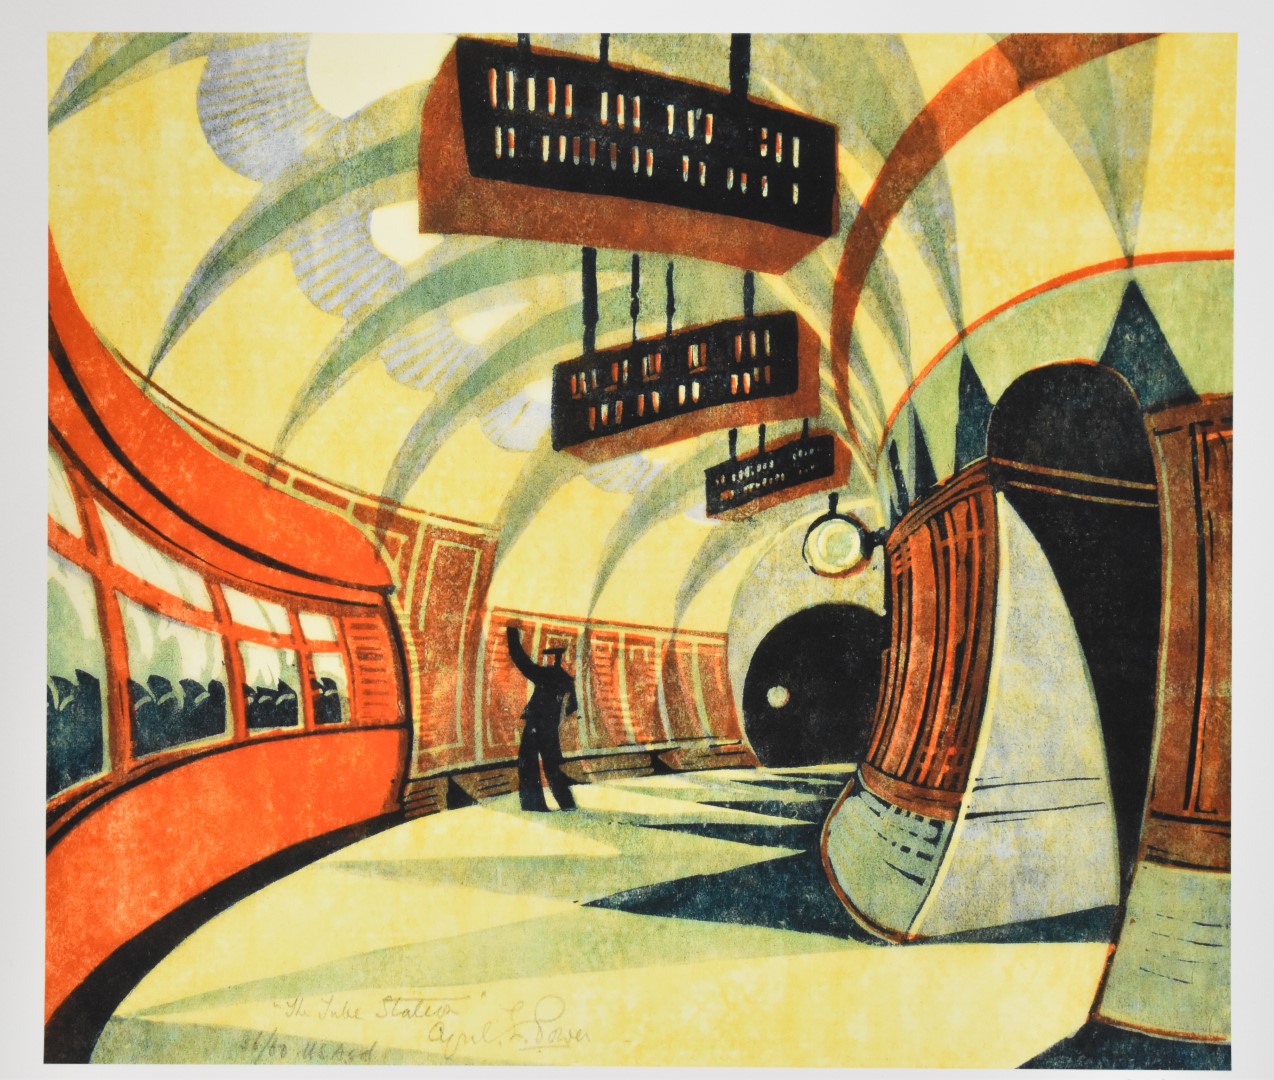 Cyril Power (1872-1951) limited edition (902/950) print The Tube station c1932, with Bookroom Art